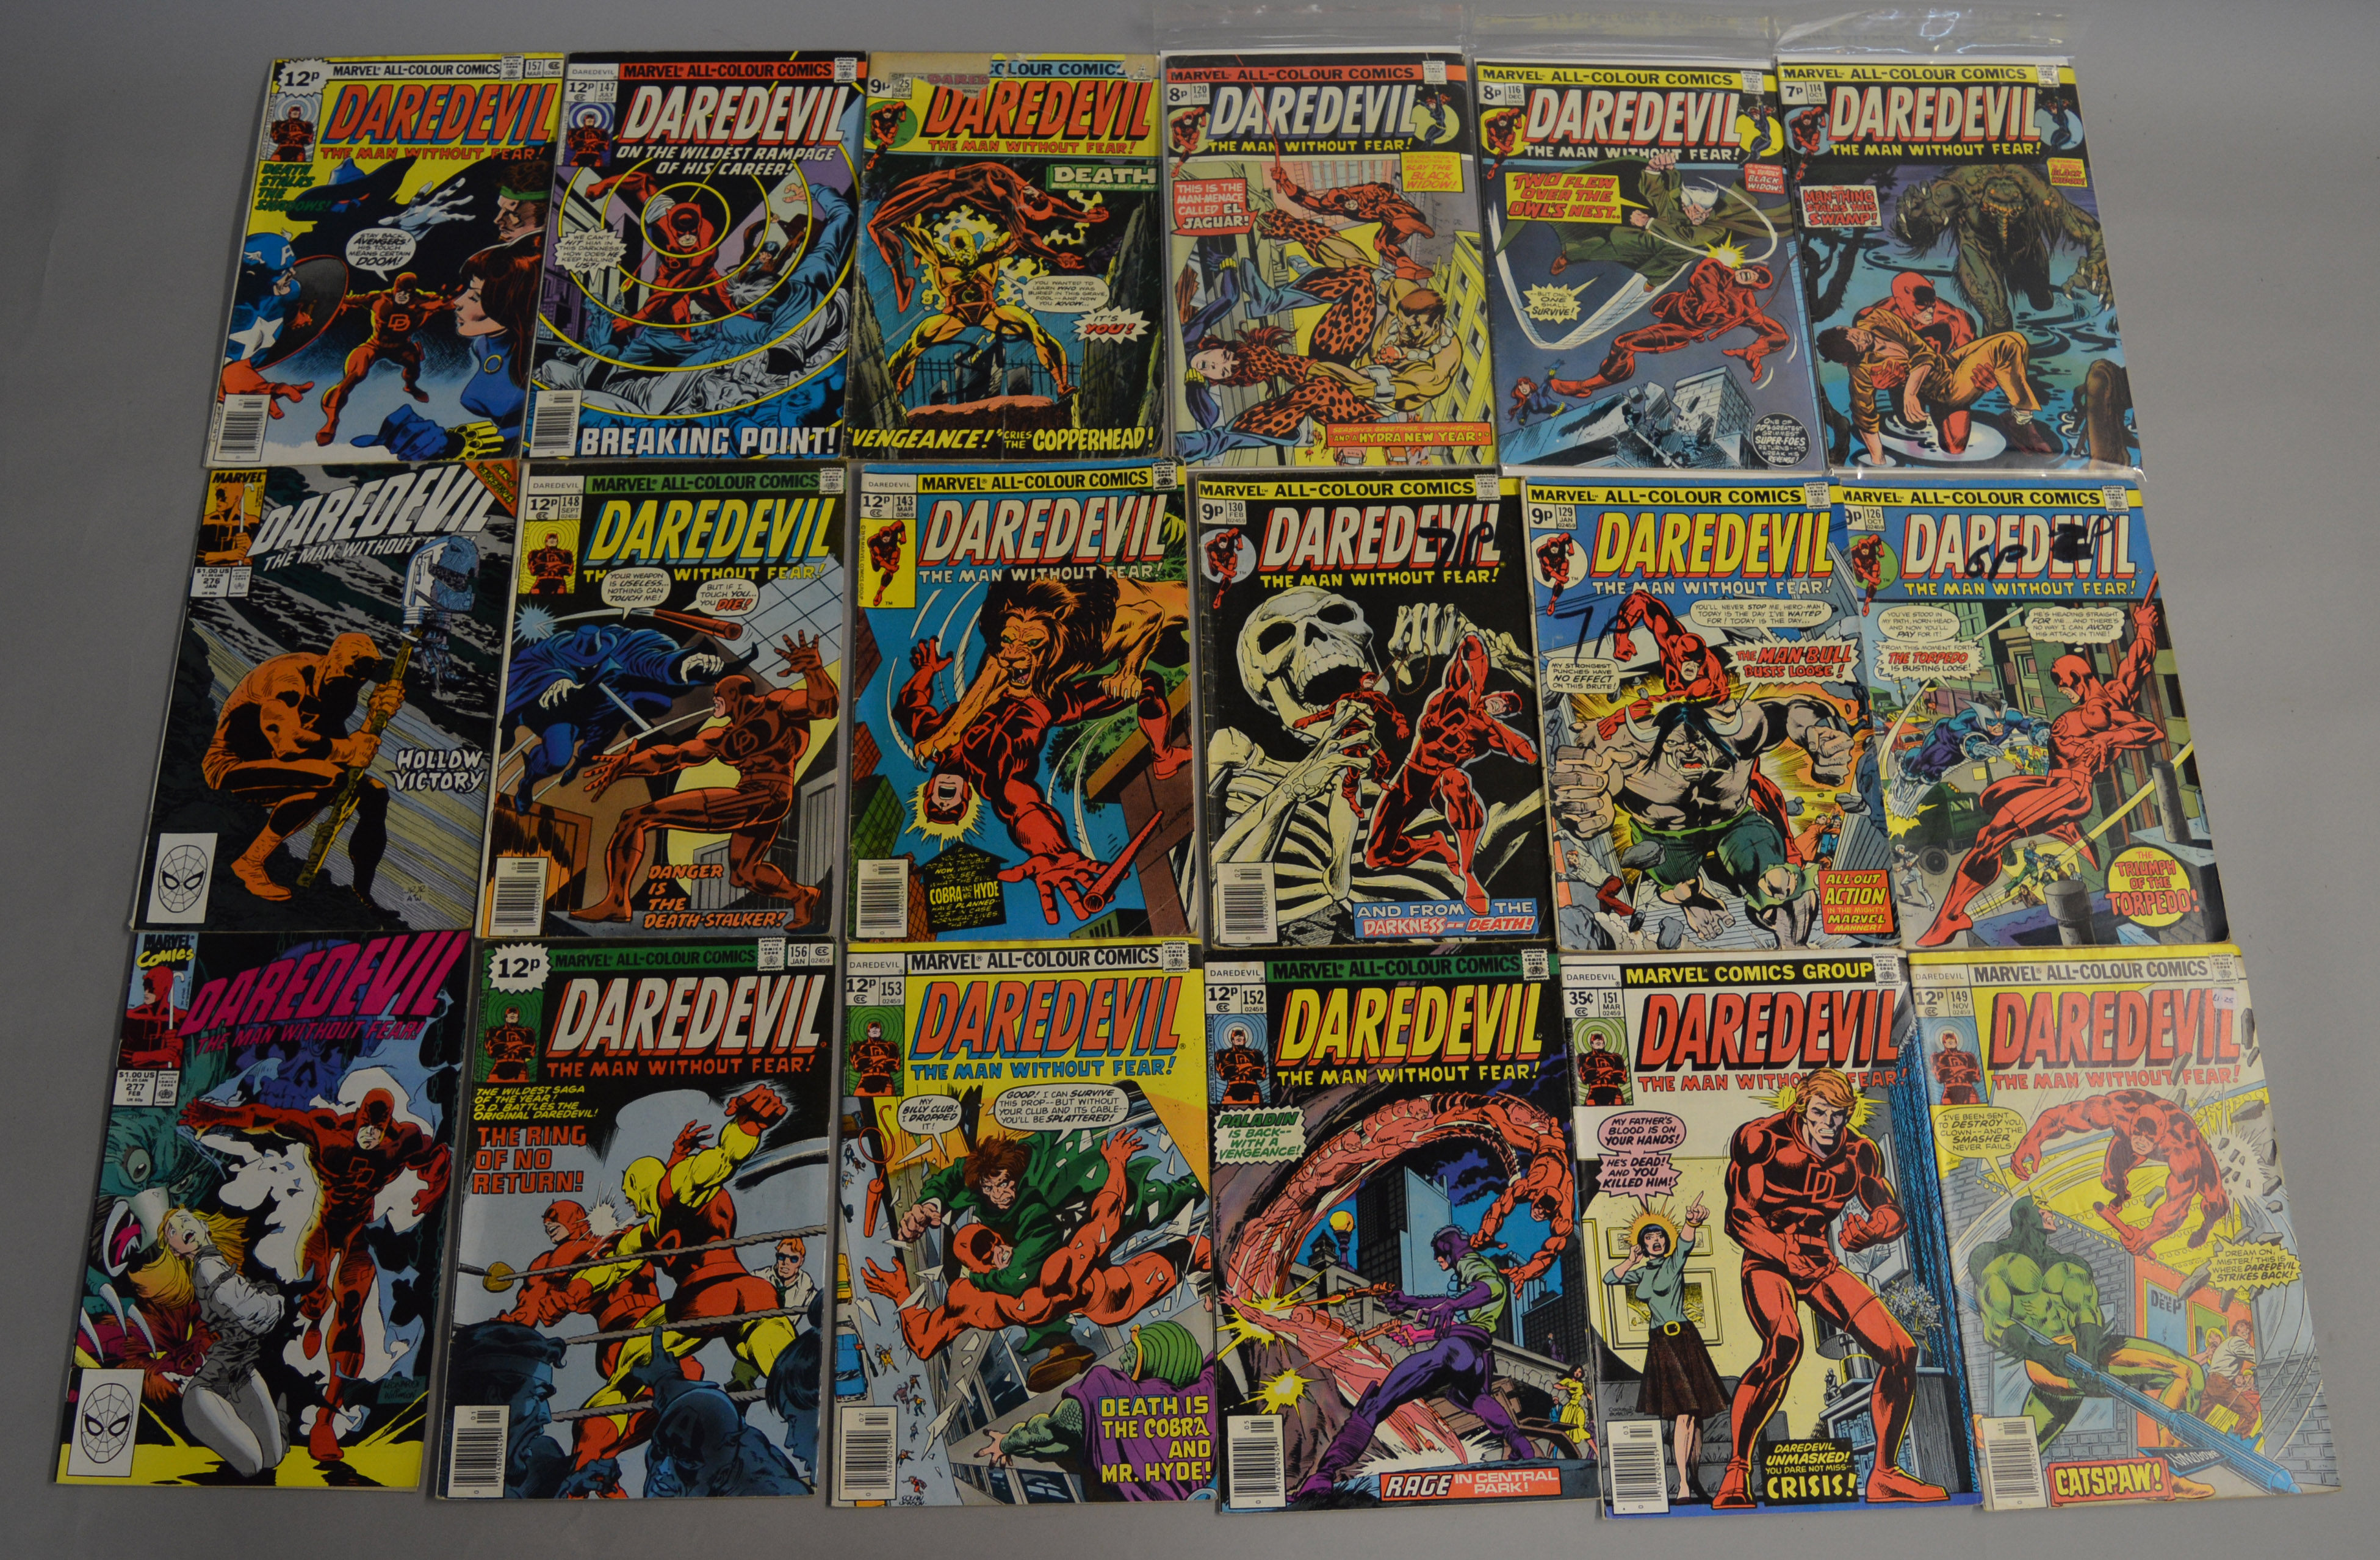 A collection of Marvel's Daredevil comics dating from the early 70's.